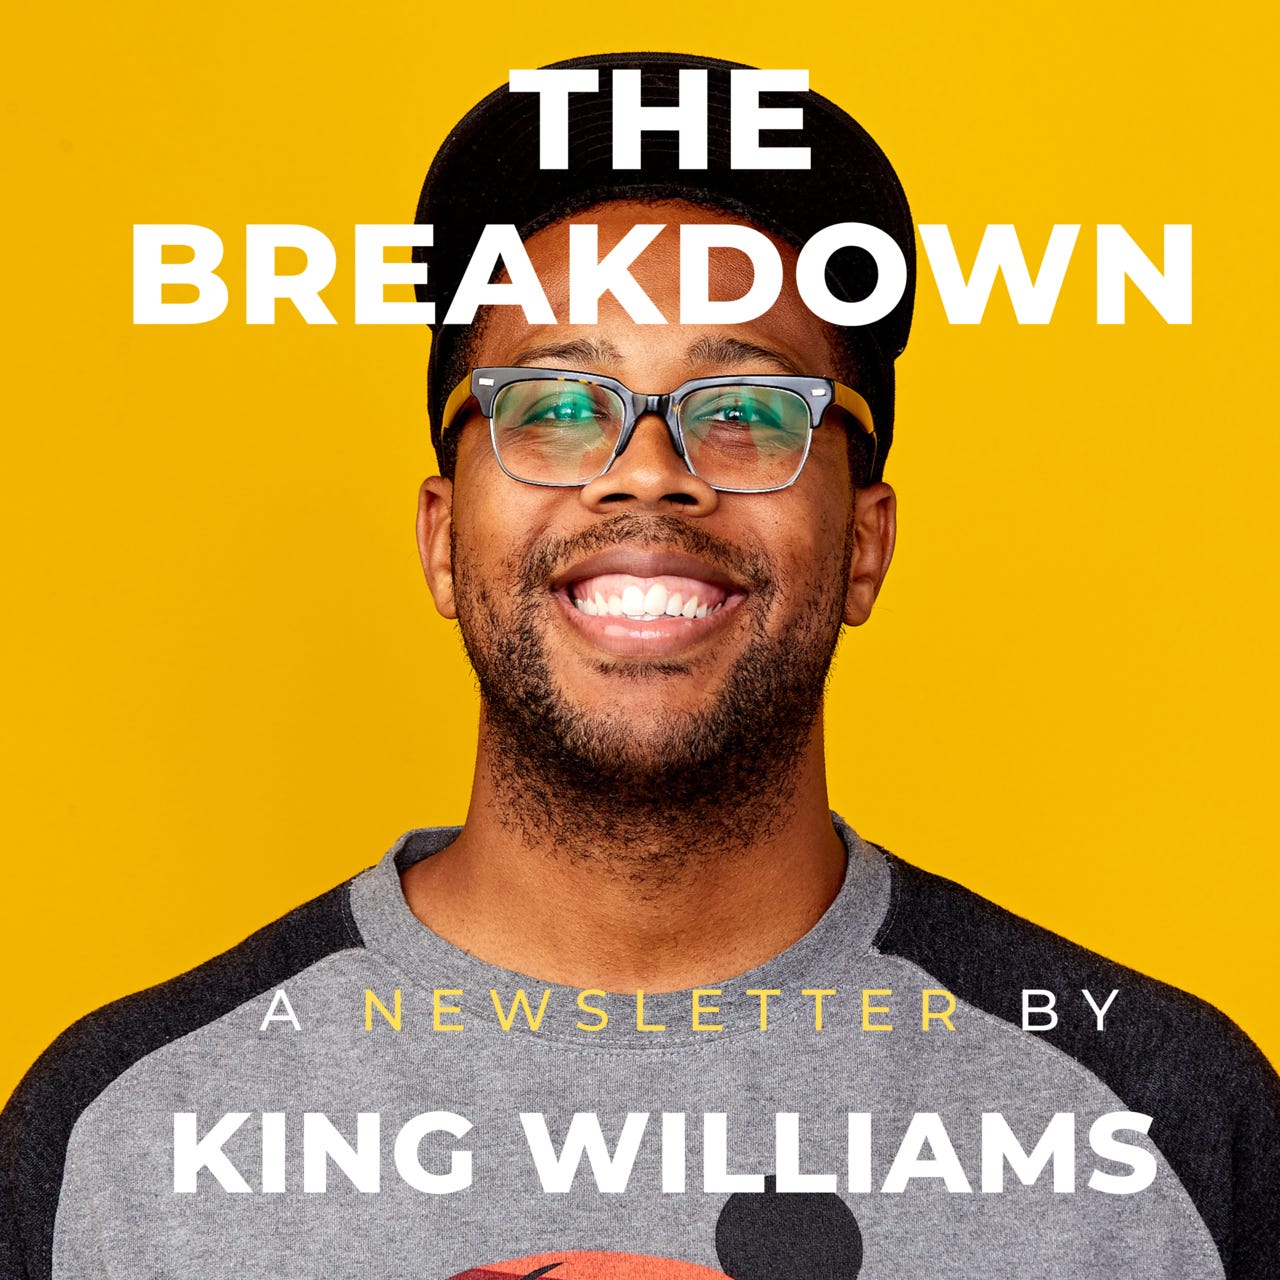 Artwork for The Breakdown by King Williams